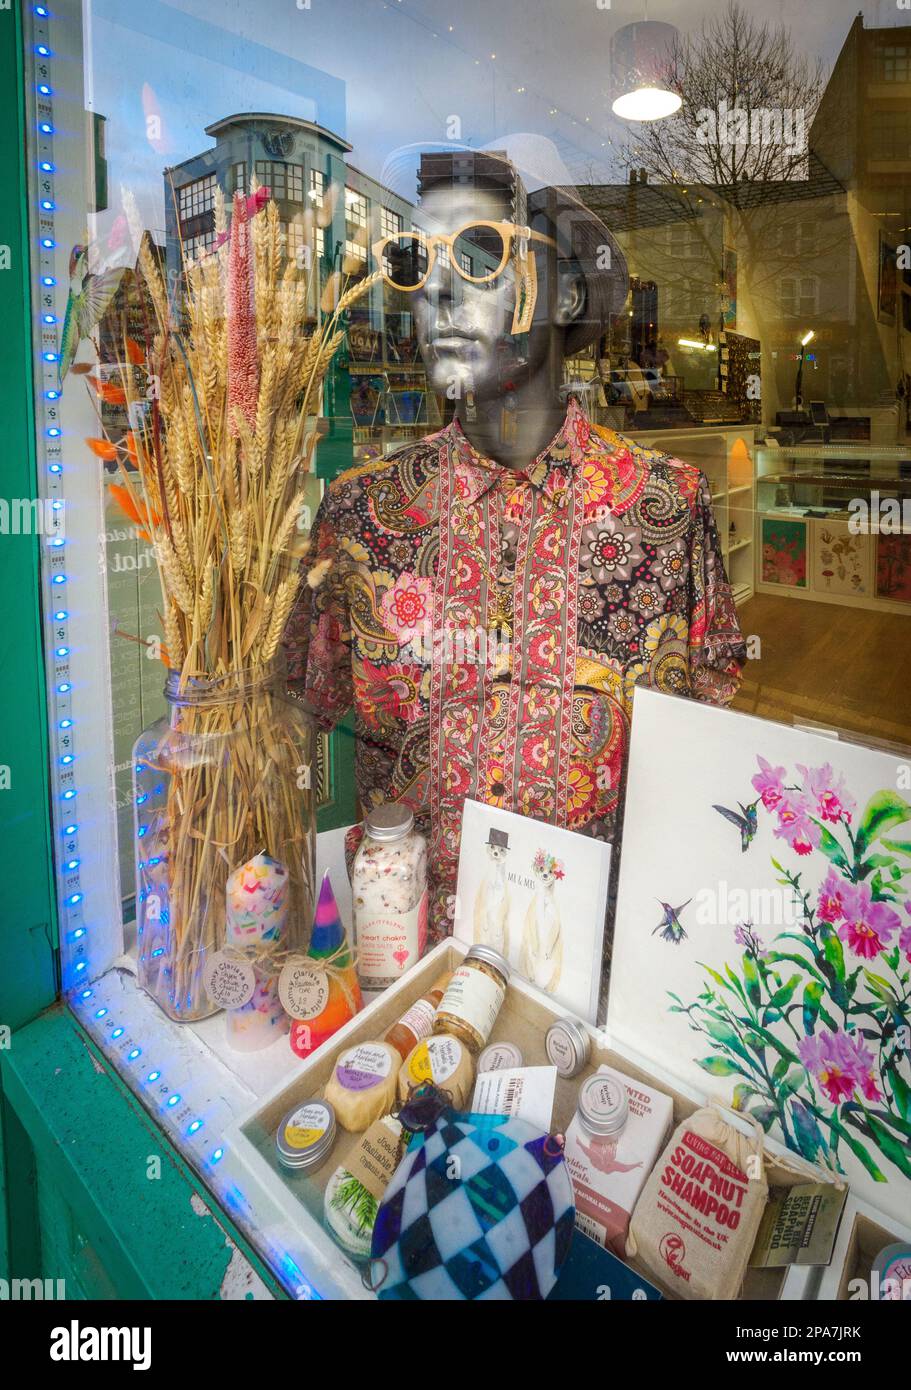 Gift shop window in a Bristol UK street with cool mannequin wearing shades Stock Photo